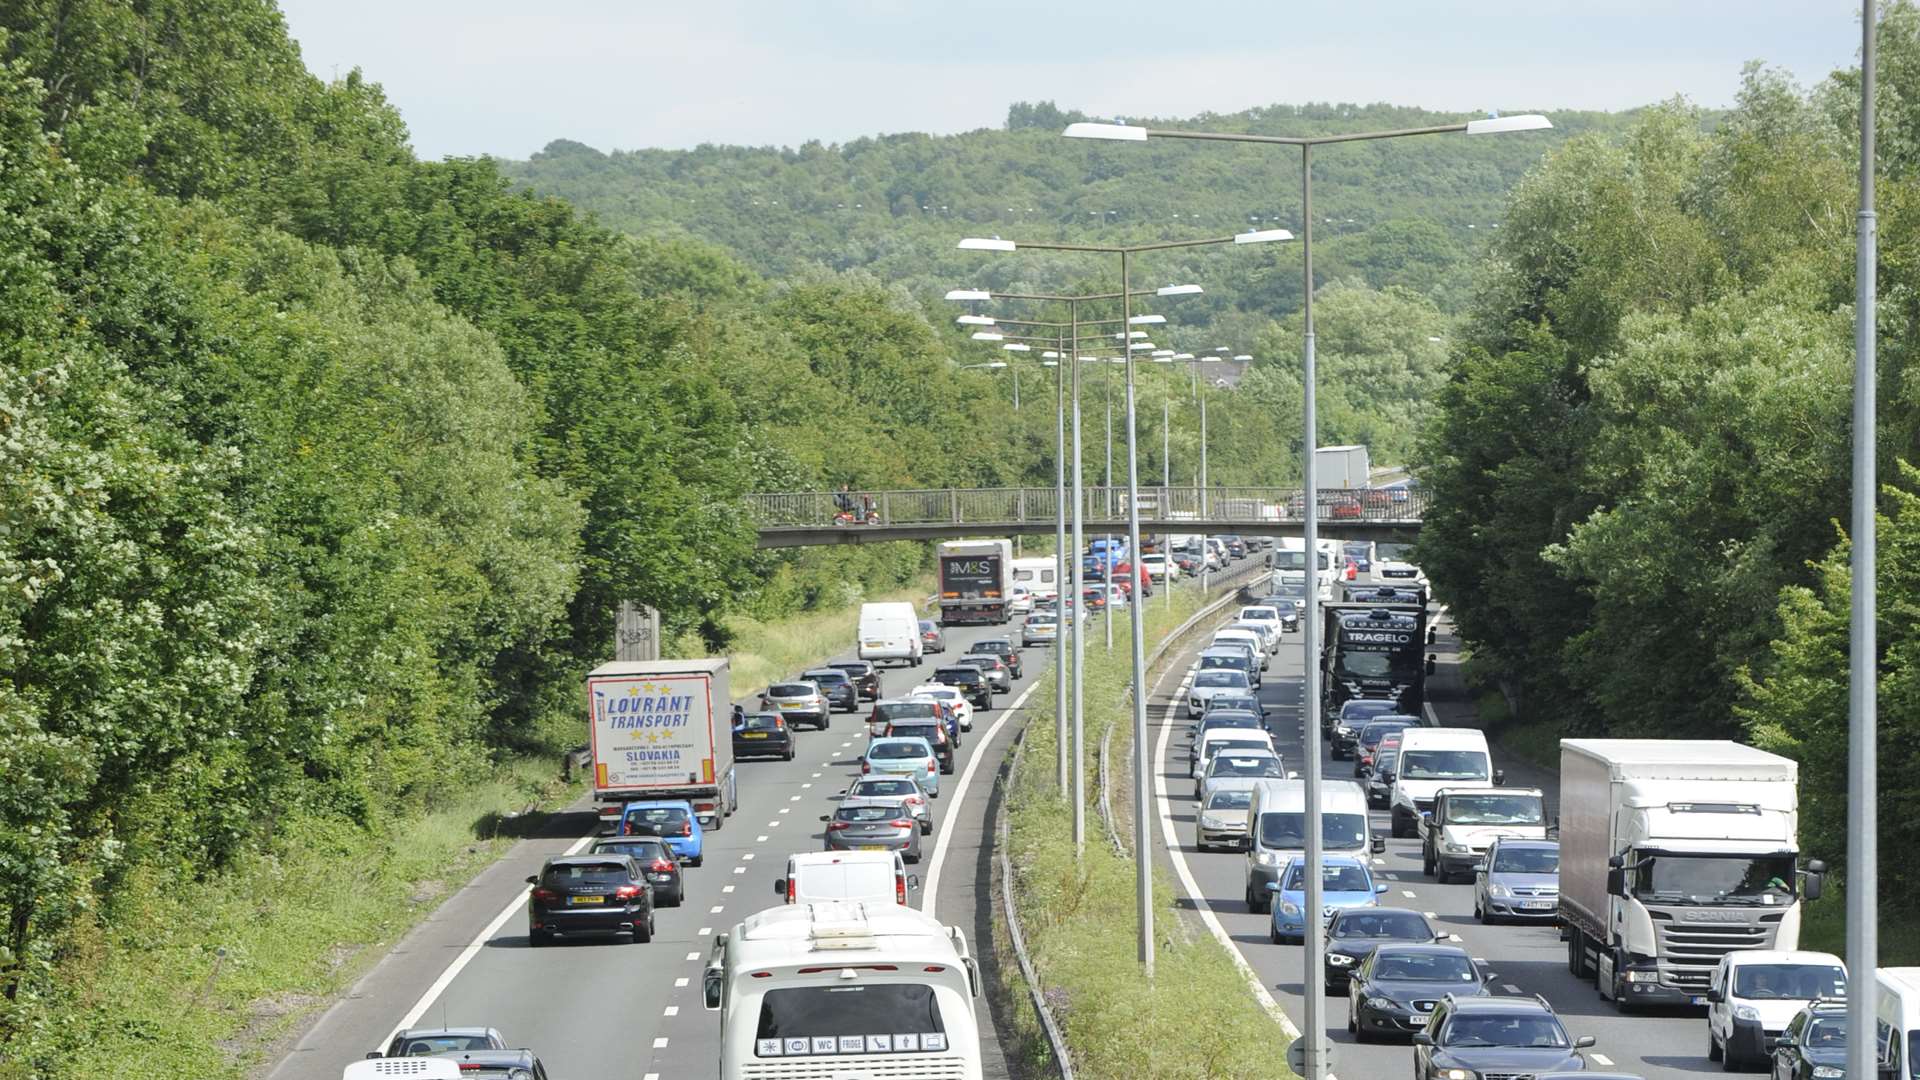 There were delays on the A2 after the dog was spotted on the loose.